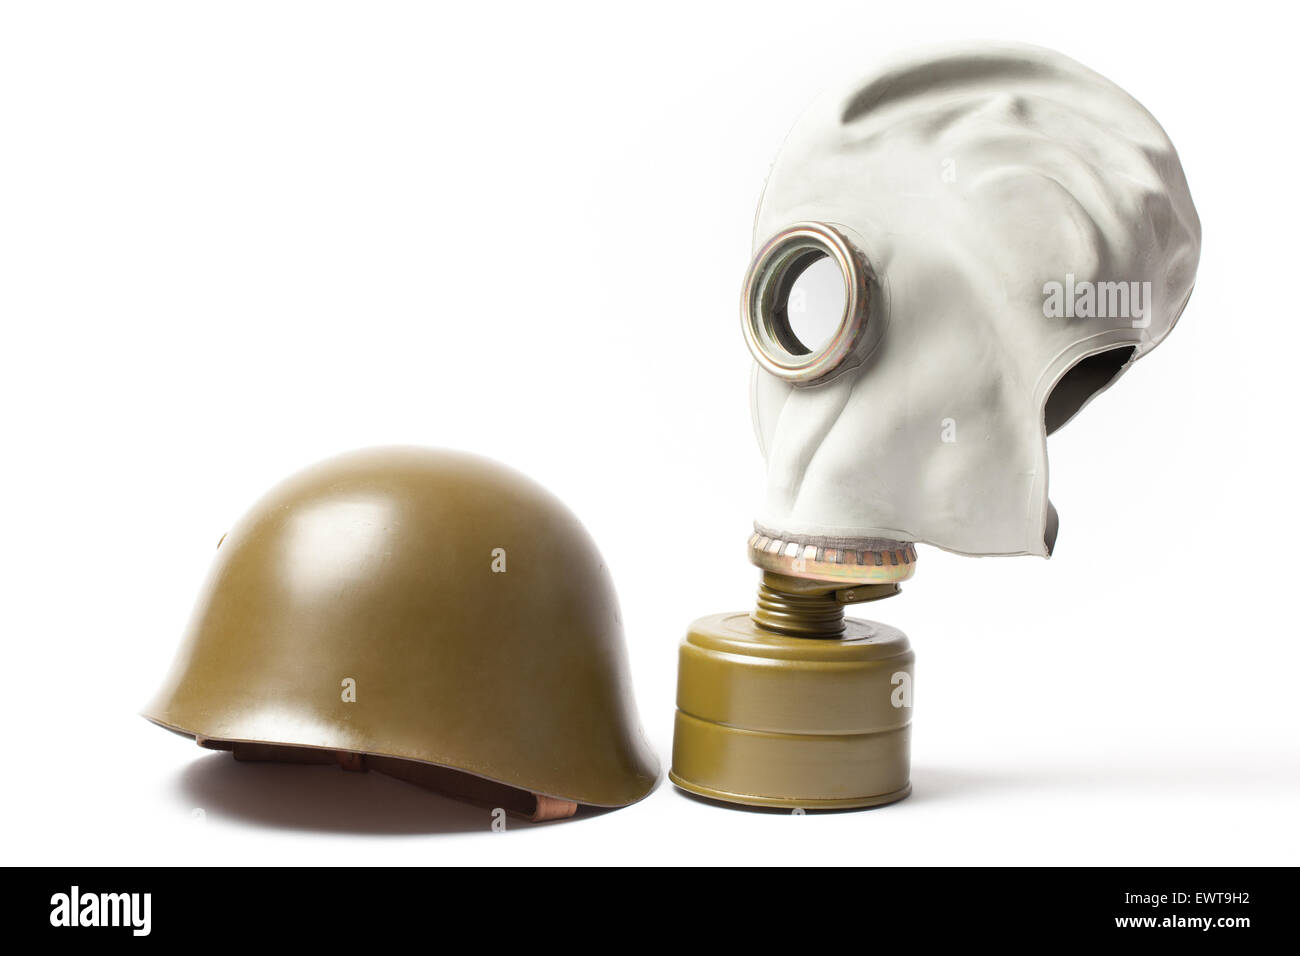 Green military helmet and an old gas mask isolated on white background. Stock Photo